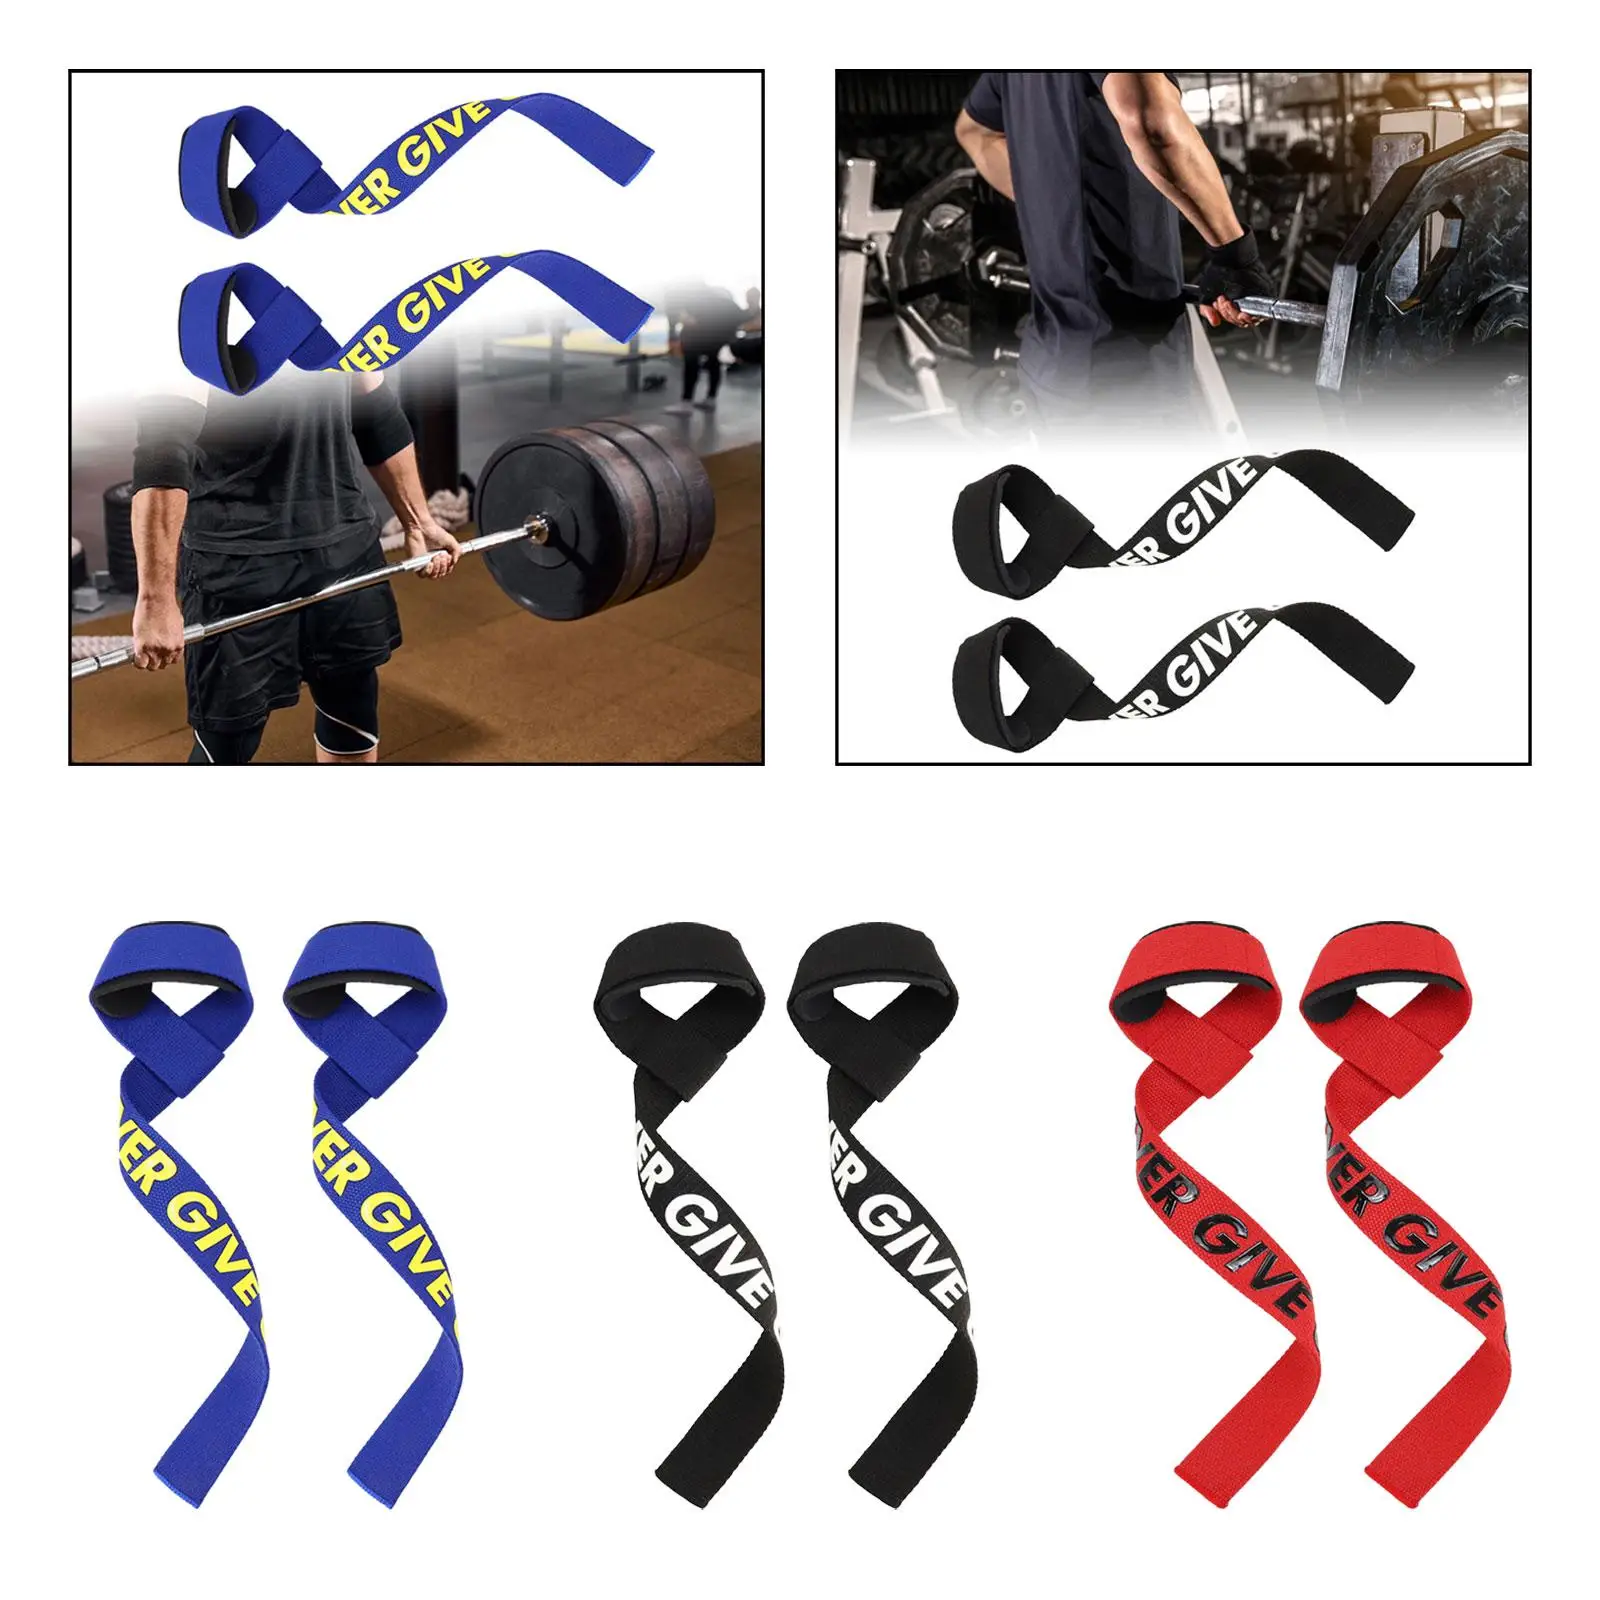 2x Weight Lifting Straps Gym Wrist Wraps for Men Women Weightlifting Wrist Straps Deadlift Straps for Gym Deadlifting Pull up